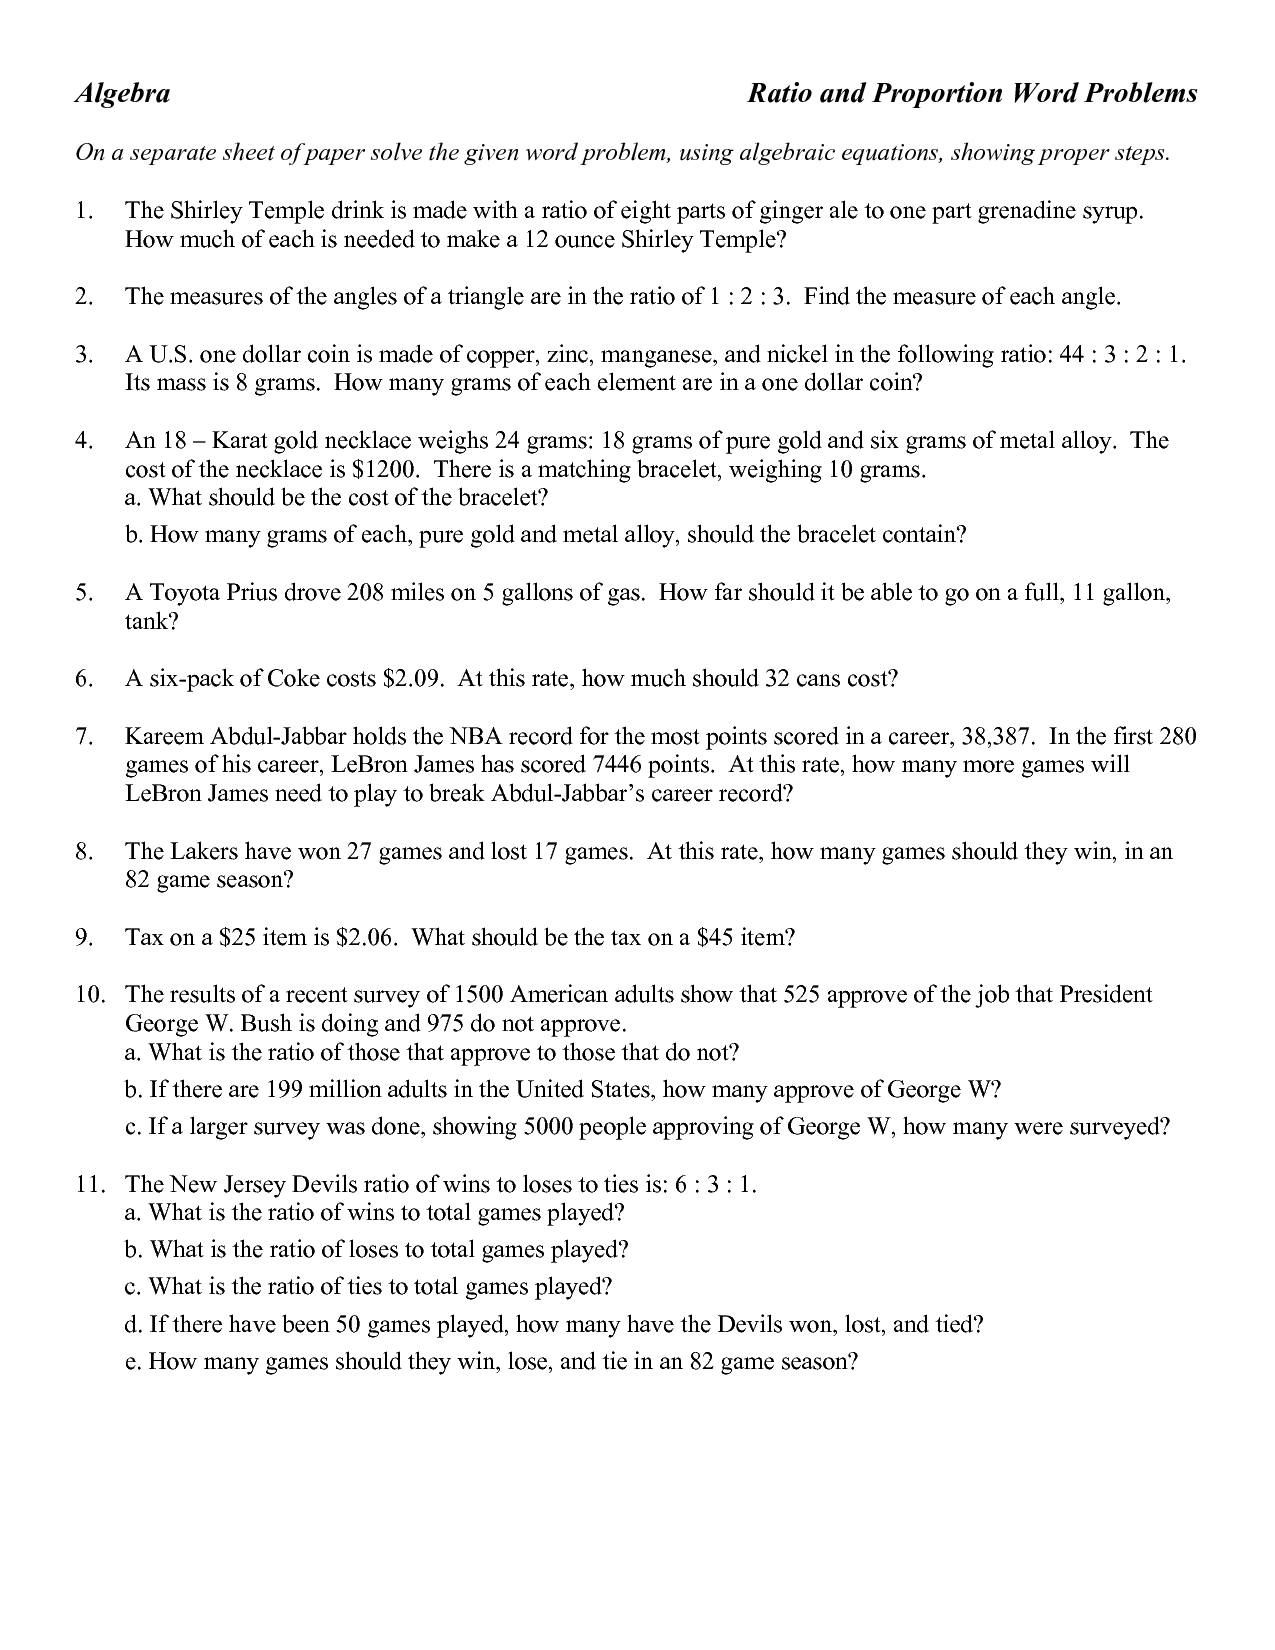 8-best-images-of-ratios-6th-grade-math-word-problems-worksheet-6th